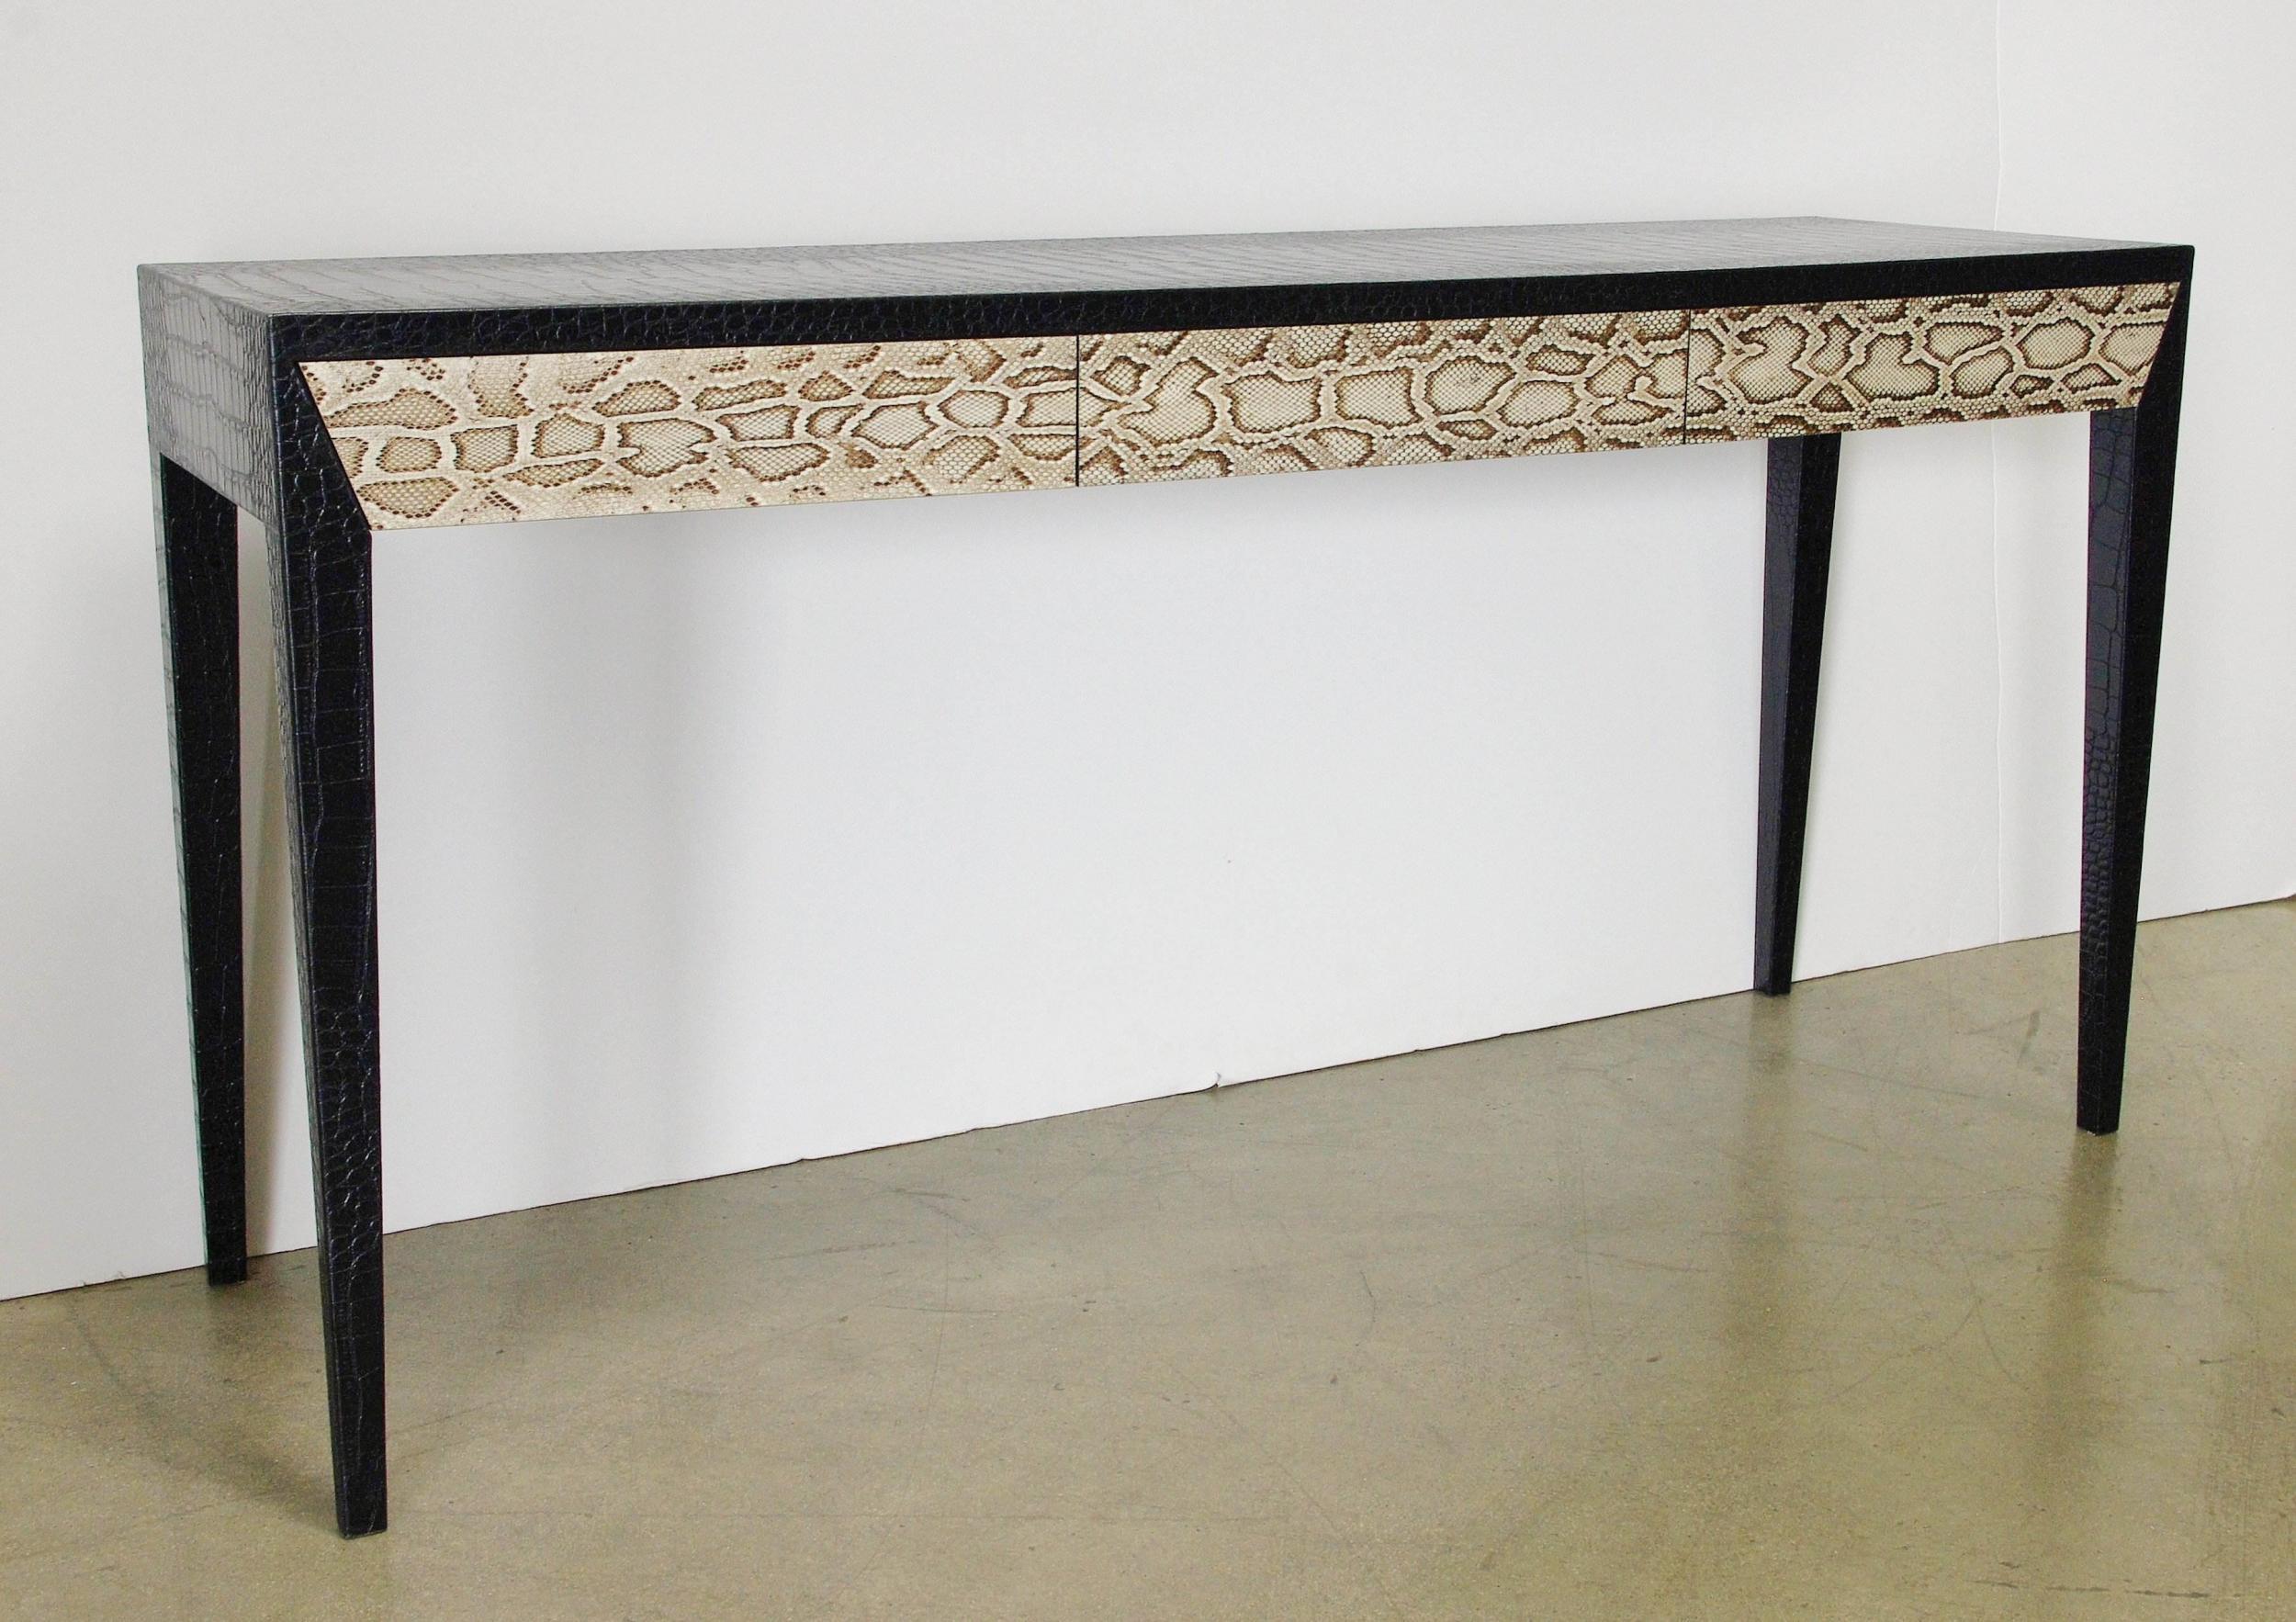 Chic Console Table w/ Black Leather & Snake Skin Attrib. to Karl Springer, 1970s For Sale 2